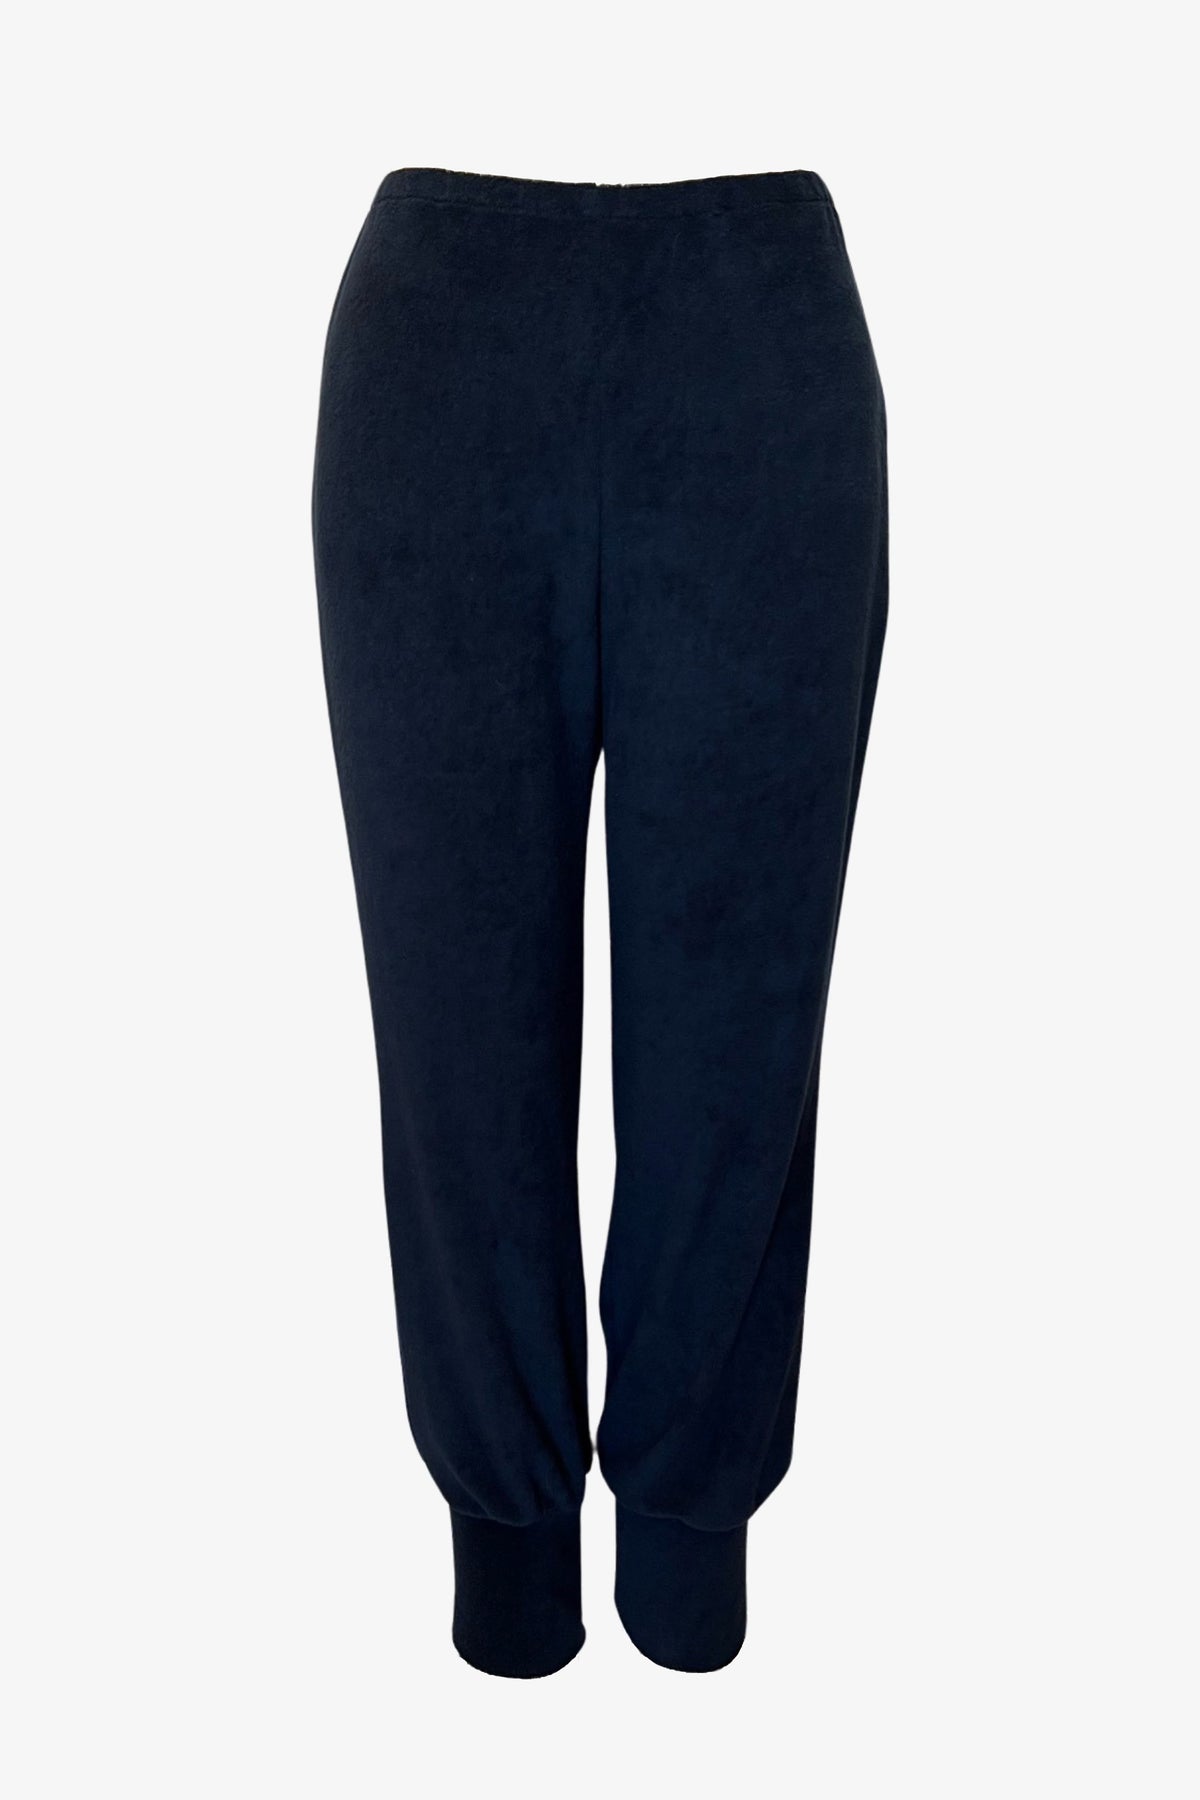 SALE Paolo Pants | Midnight Blue Terry